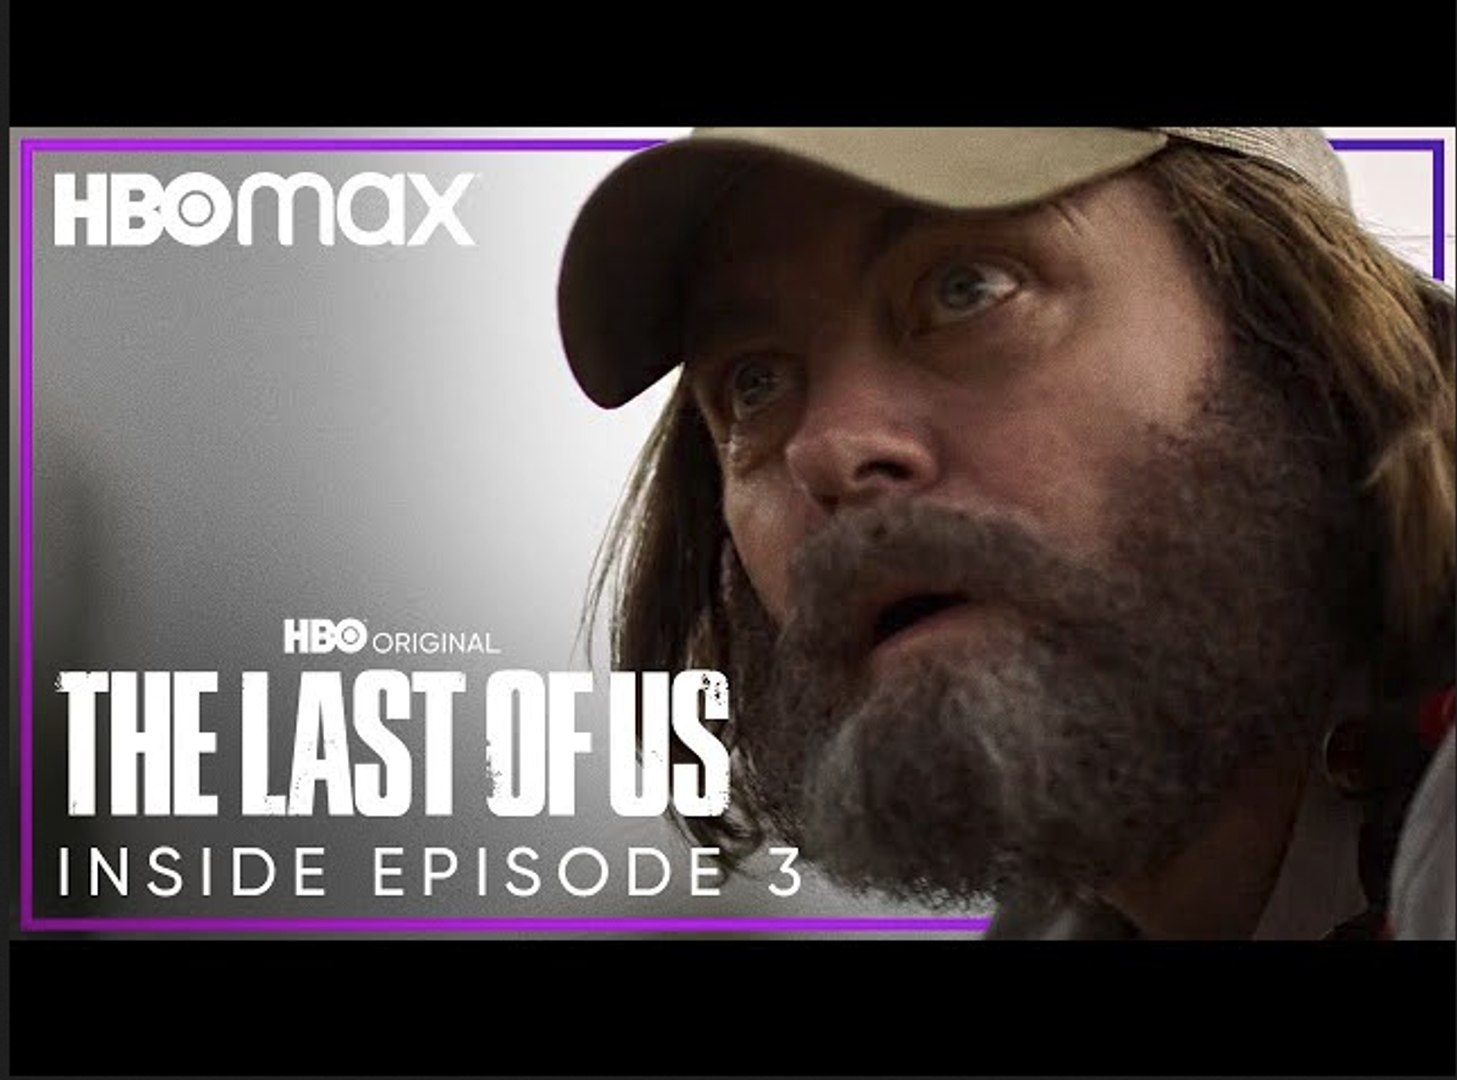 The Last of Us: Episode 3 Preview Trailer - Pedro Pascal, Nick